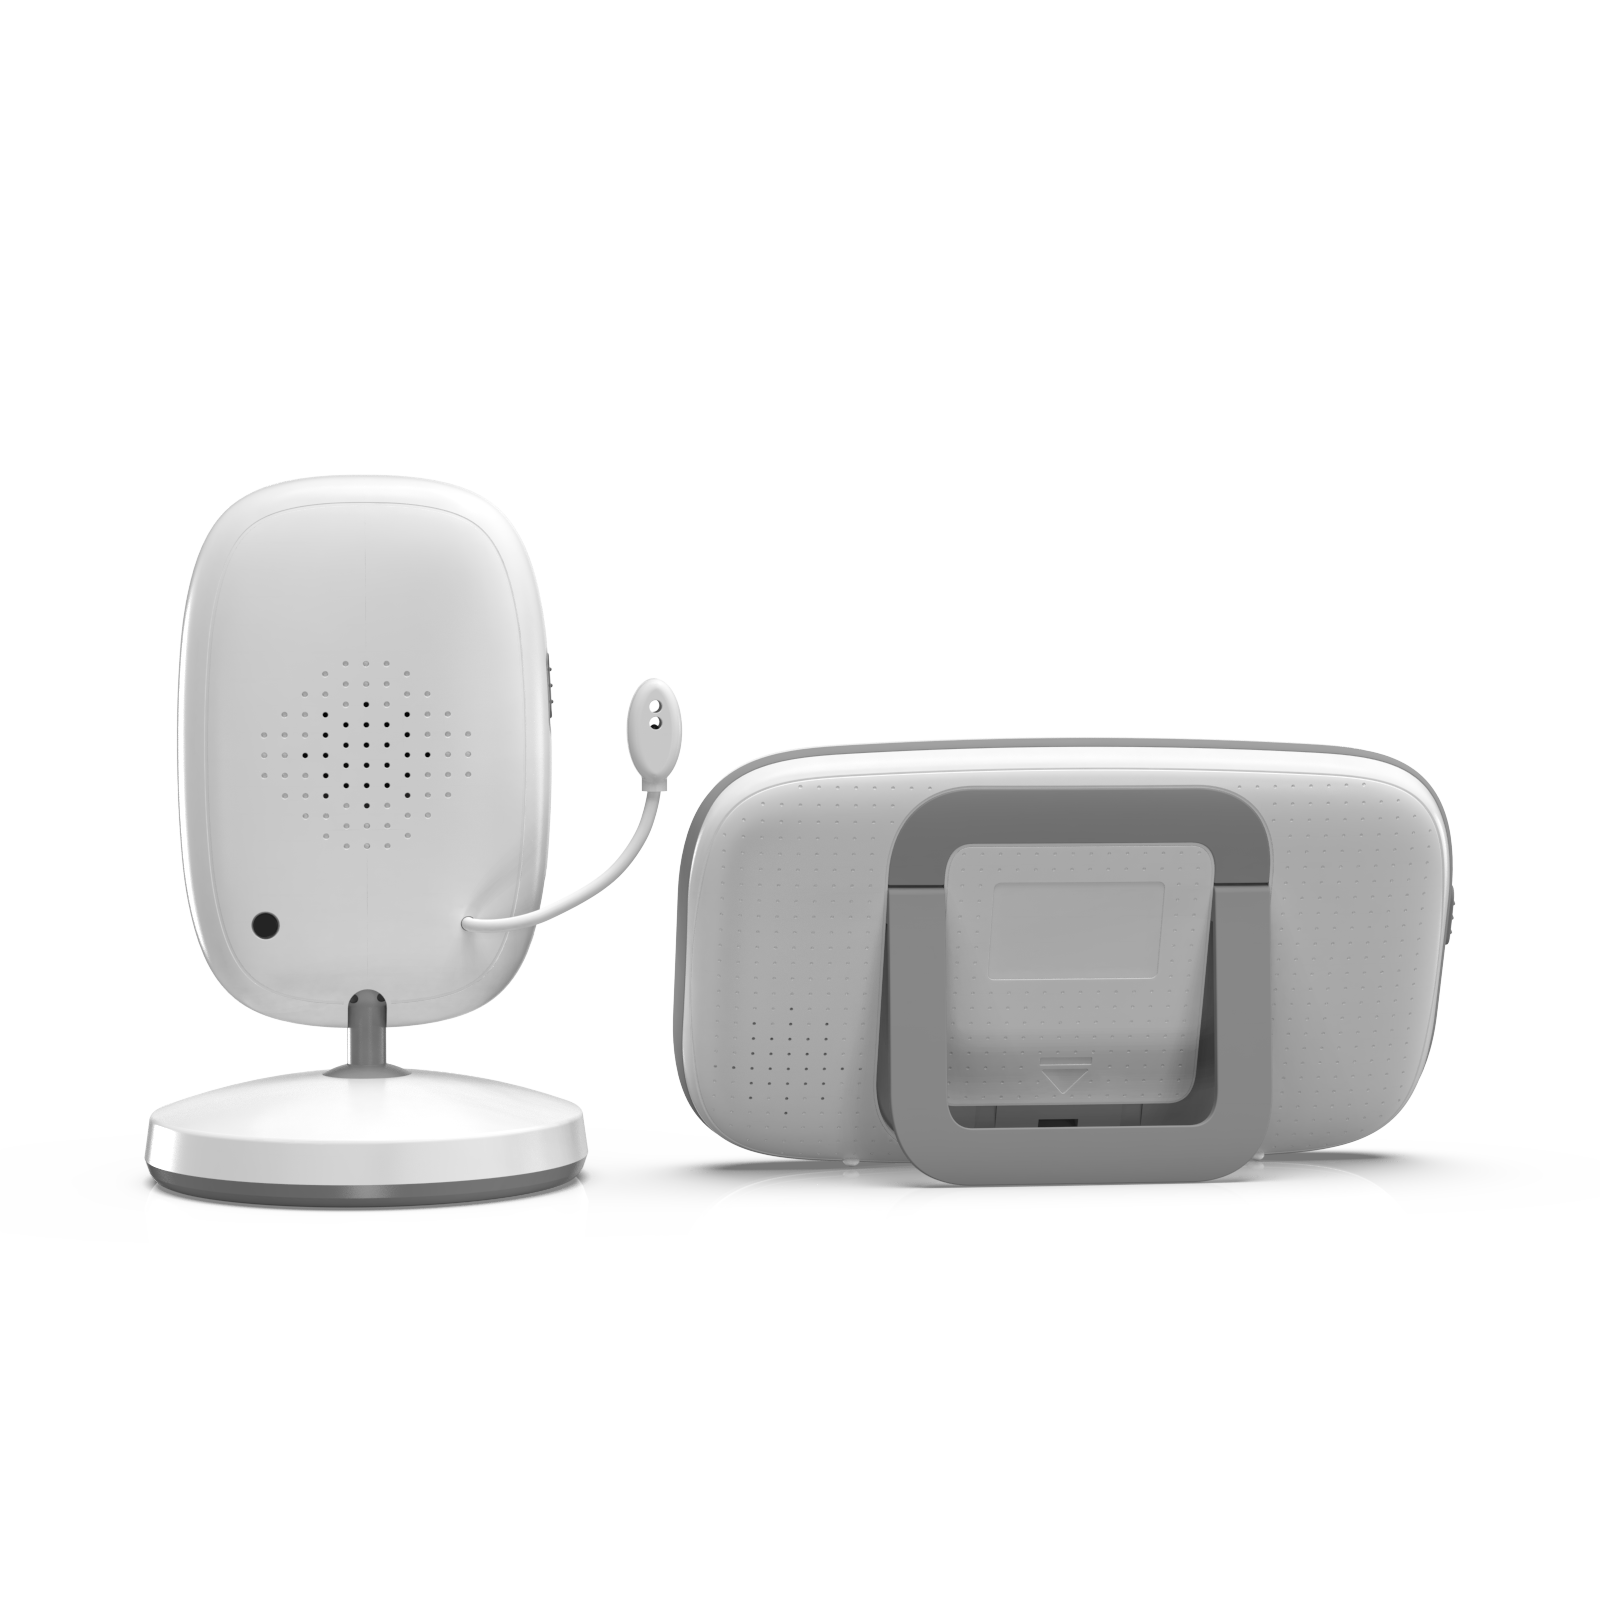 BOIFUN VB603 Baby Monitor with Camera and Audio, No WiFi, VOX Mode